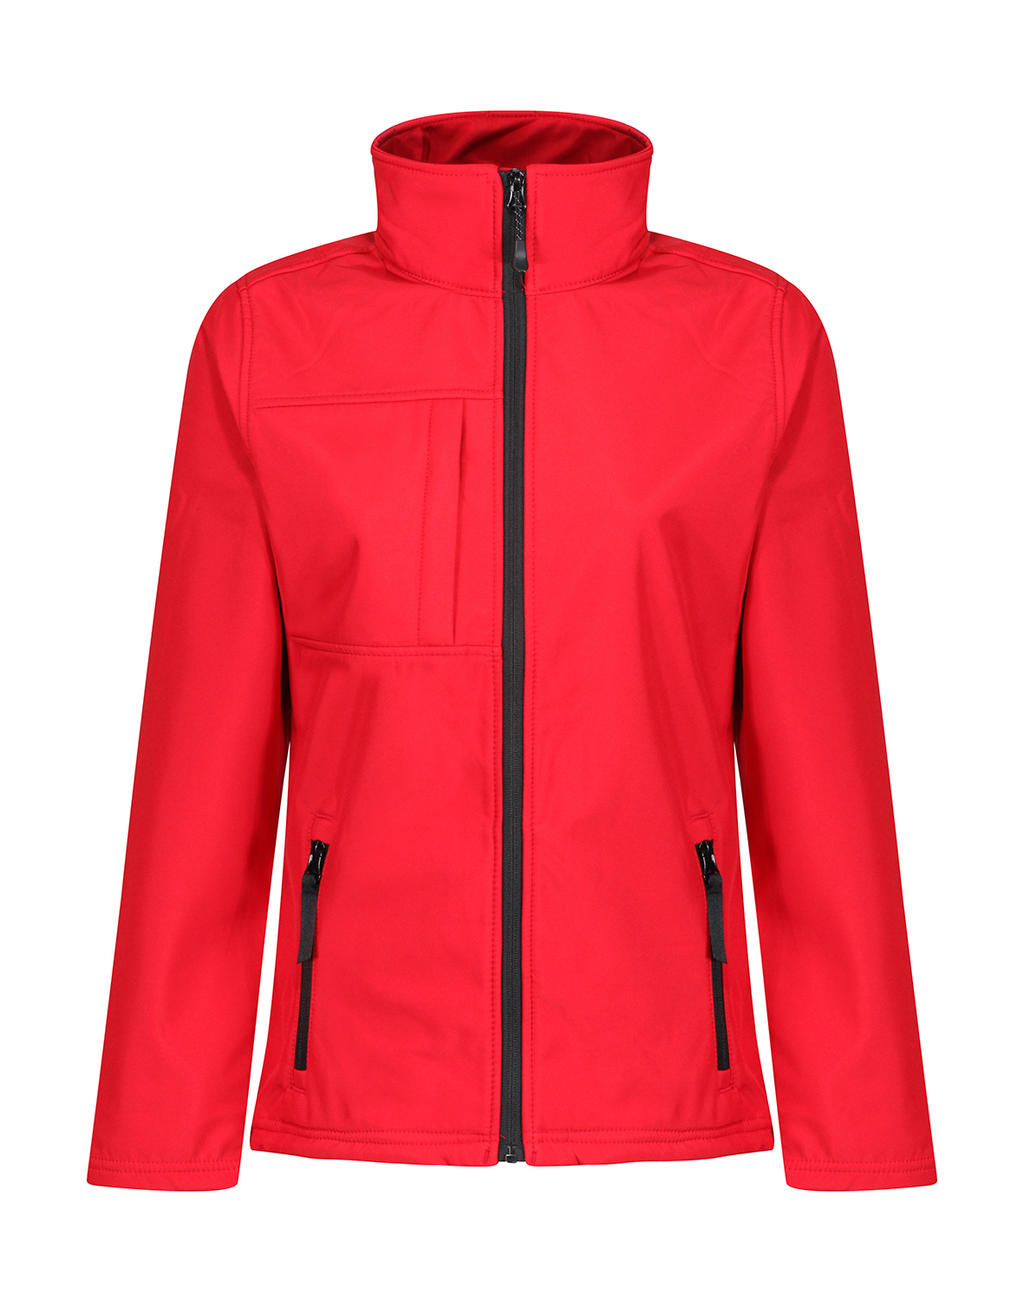  Womens Octagon II Softshell in Farbe Classic Red/Black